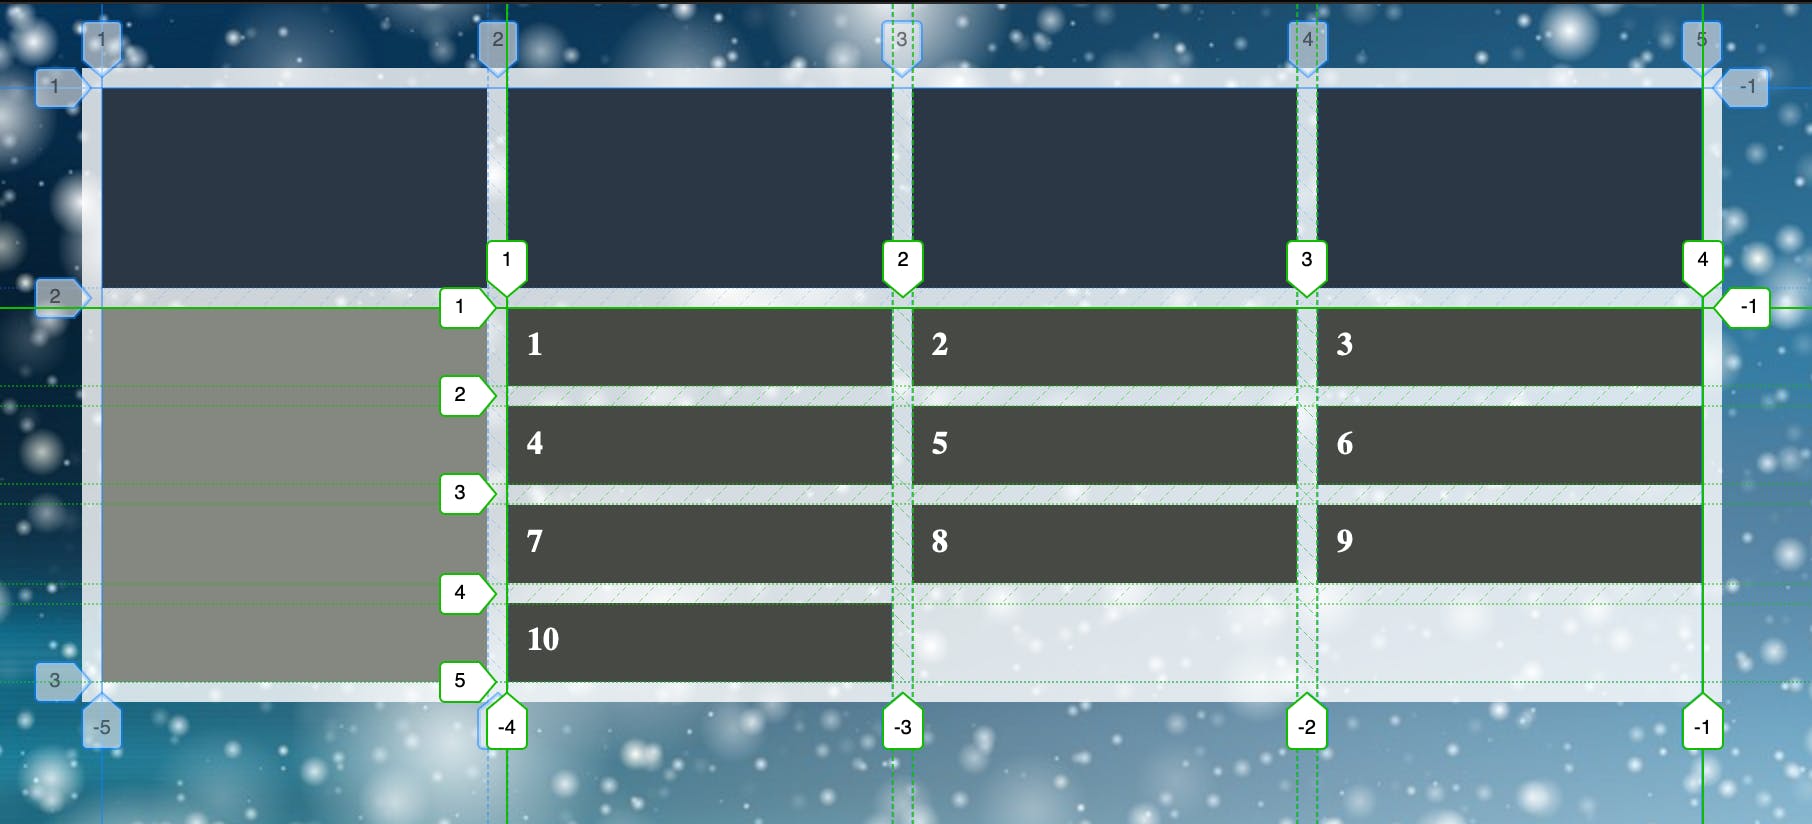 The parent grid provides 4 columns. A subgrid spans column 2-4 in the parent grid, and creates it's own 3x4 grid. An item in the first parent grid column is able to visually span the height of the subgrid items.